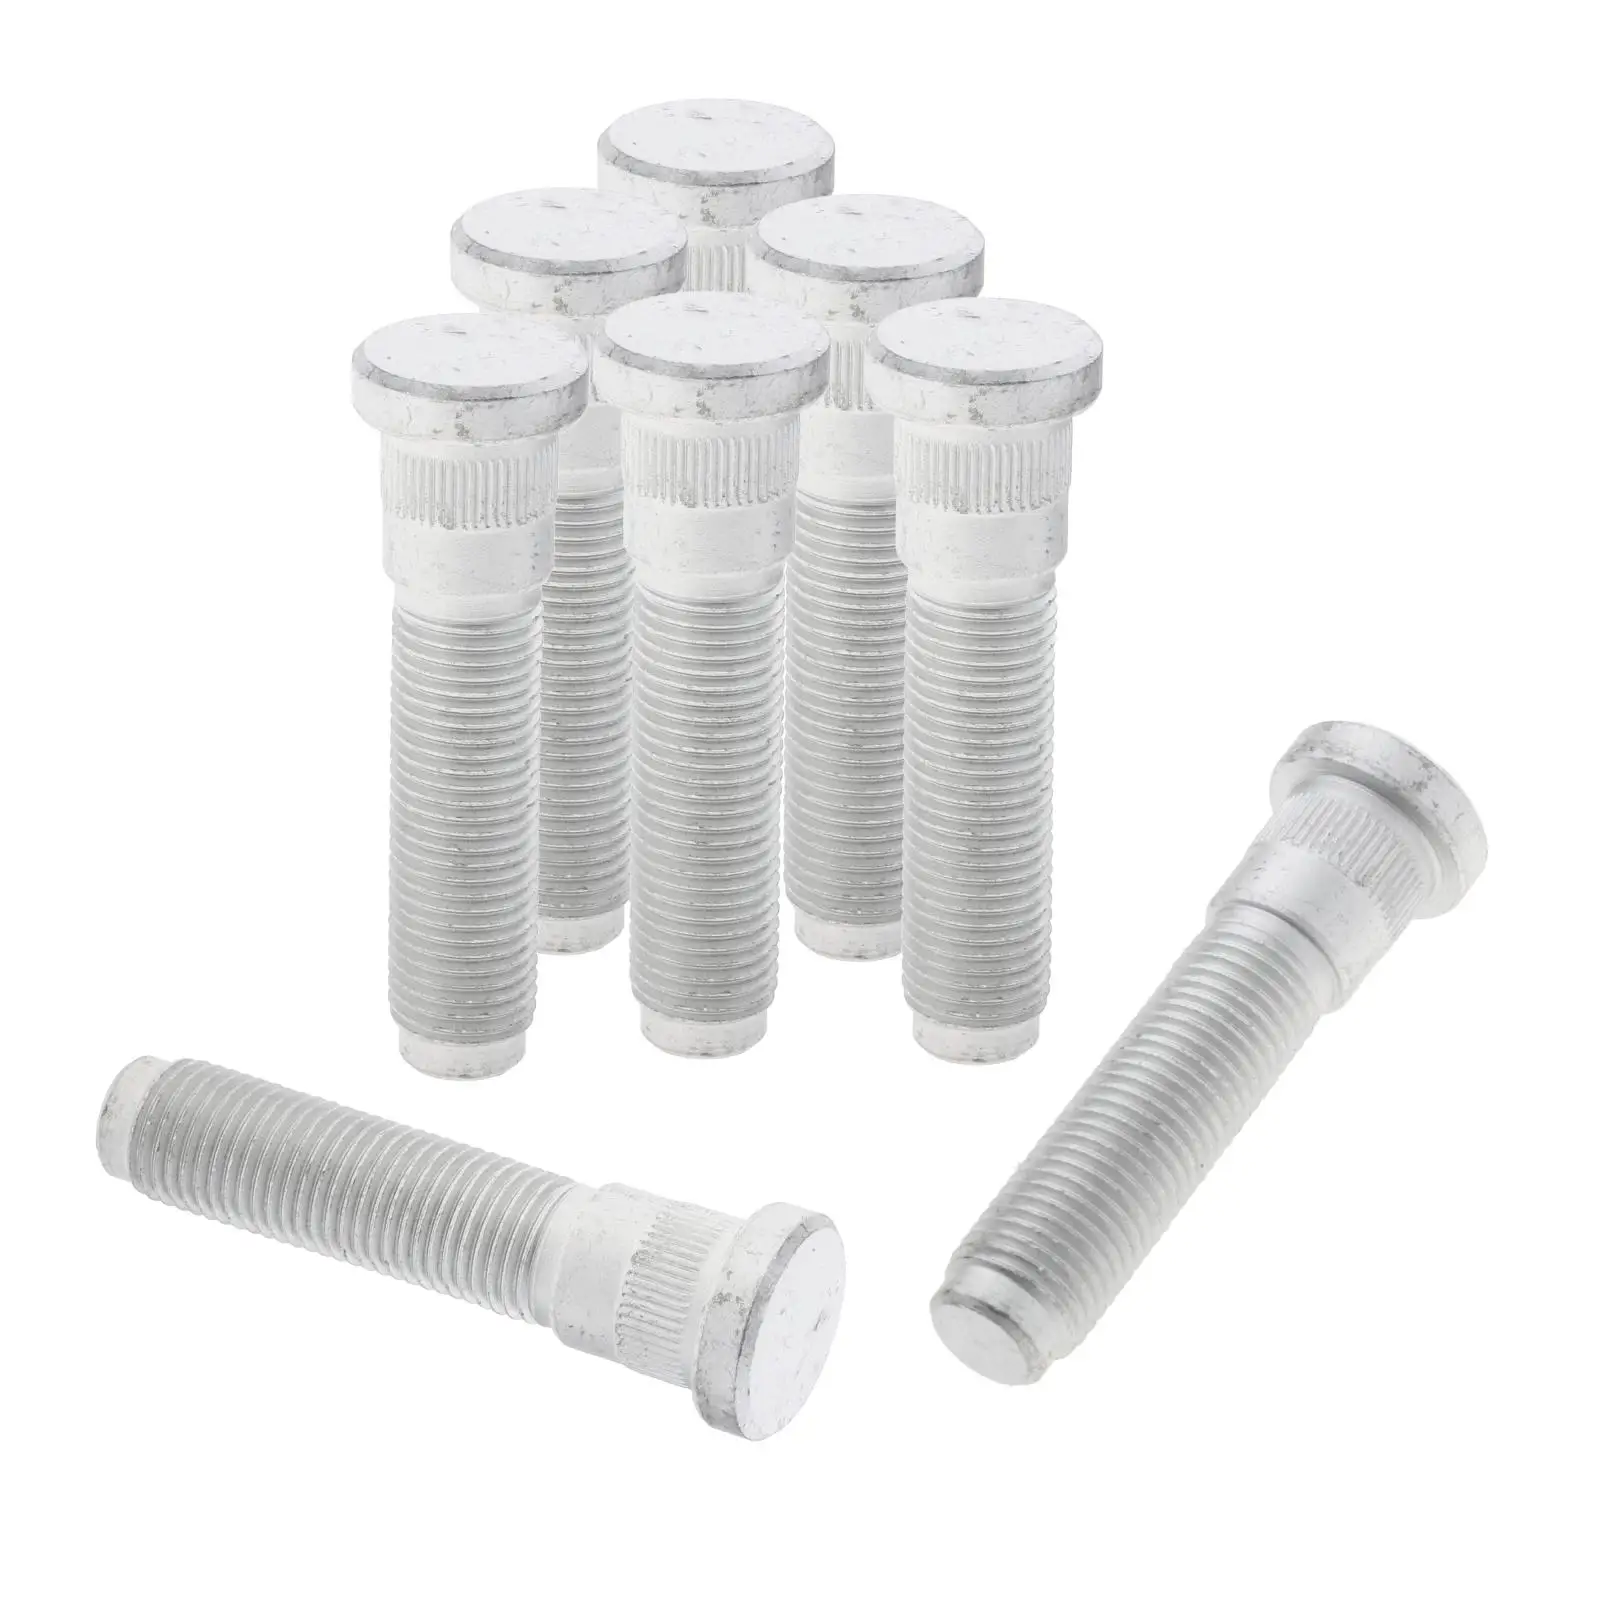 8 Pieces Front Or Rear Wheel Stud Extended  for  Ram 2500 3500 6509866AA, ,Easy to Install